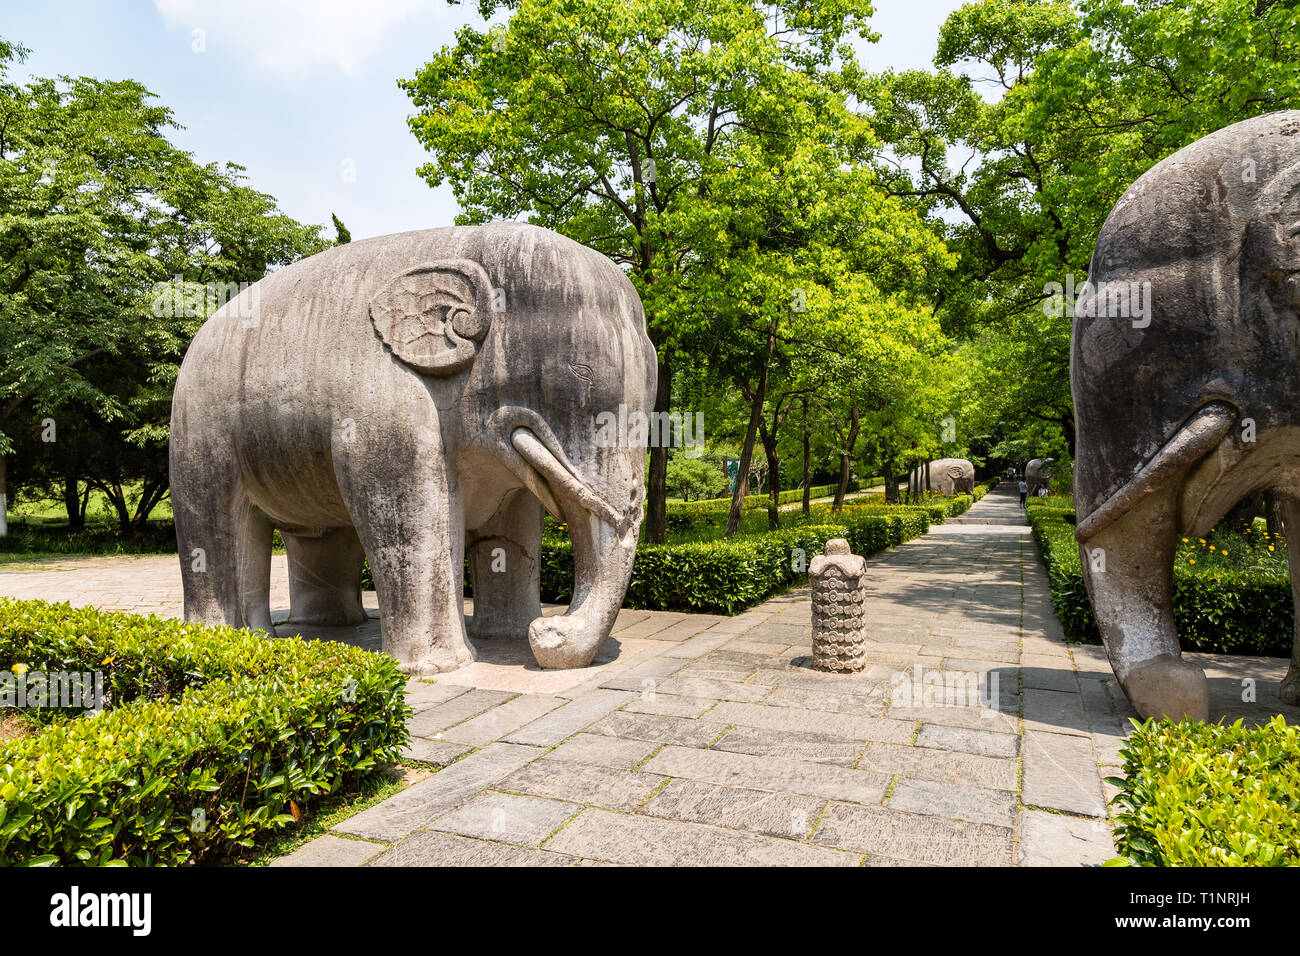 Elephant statues in the sacred way in Ming Xiaoling Mausoleum, located on mount Zijin, Nanjing, Jiangsu Province, China. Ming Xiaoling Mausoleum is UN Stock Photo